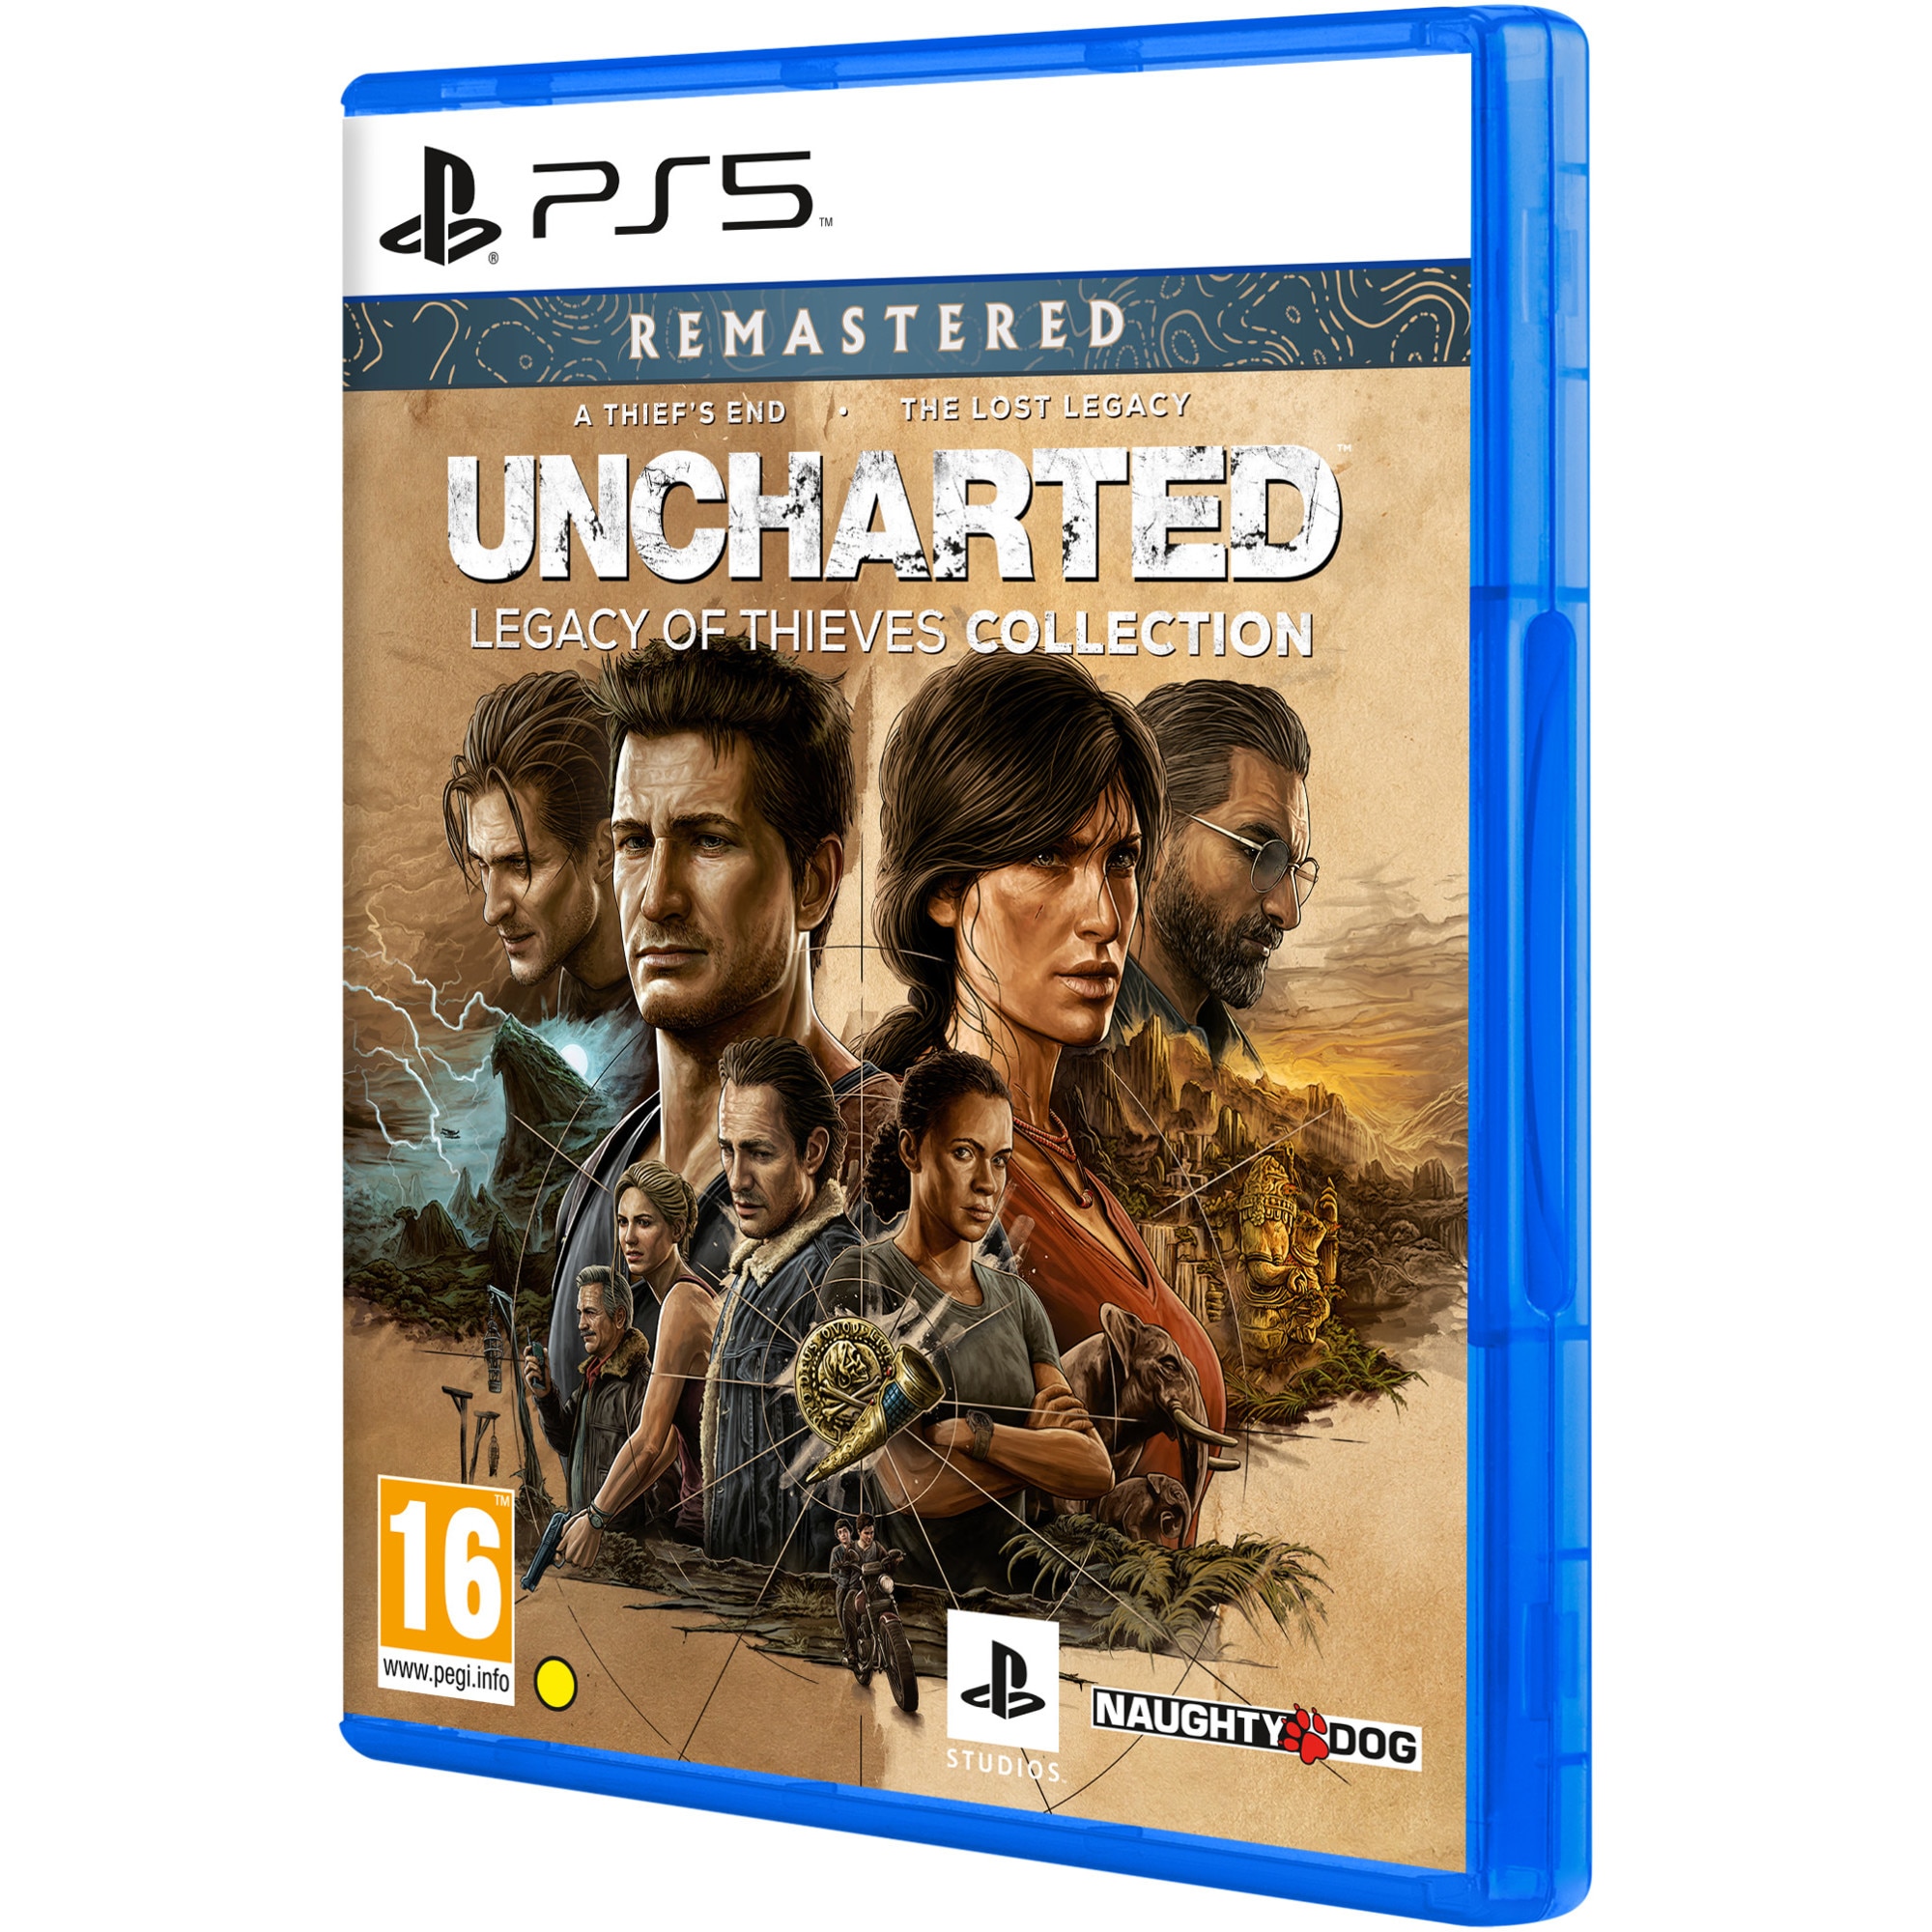 Legacy of thieves collection купить. Uncharted Legacy of Thieves collection ps5. Uncharted ps5 диск. Uncharted Legacy of Thieves collection ps5 обложка. Uncharted пс5.